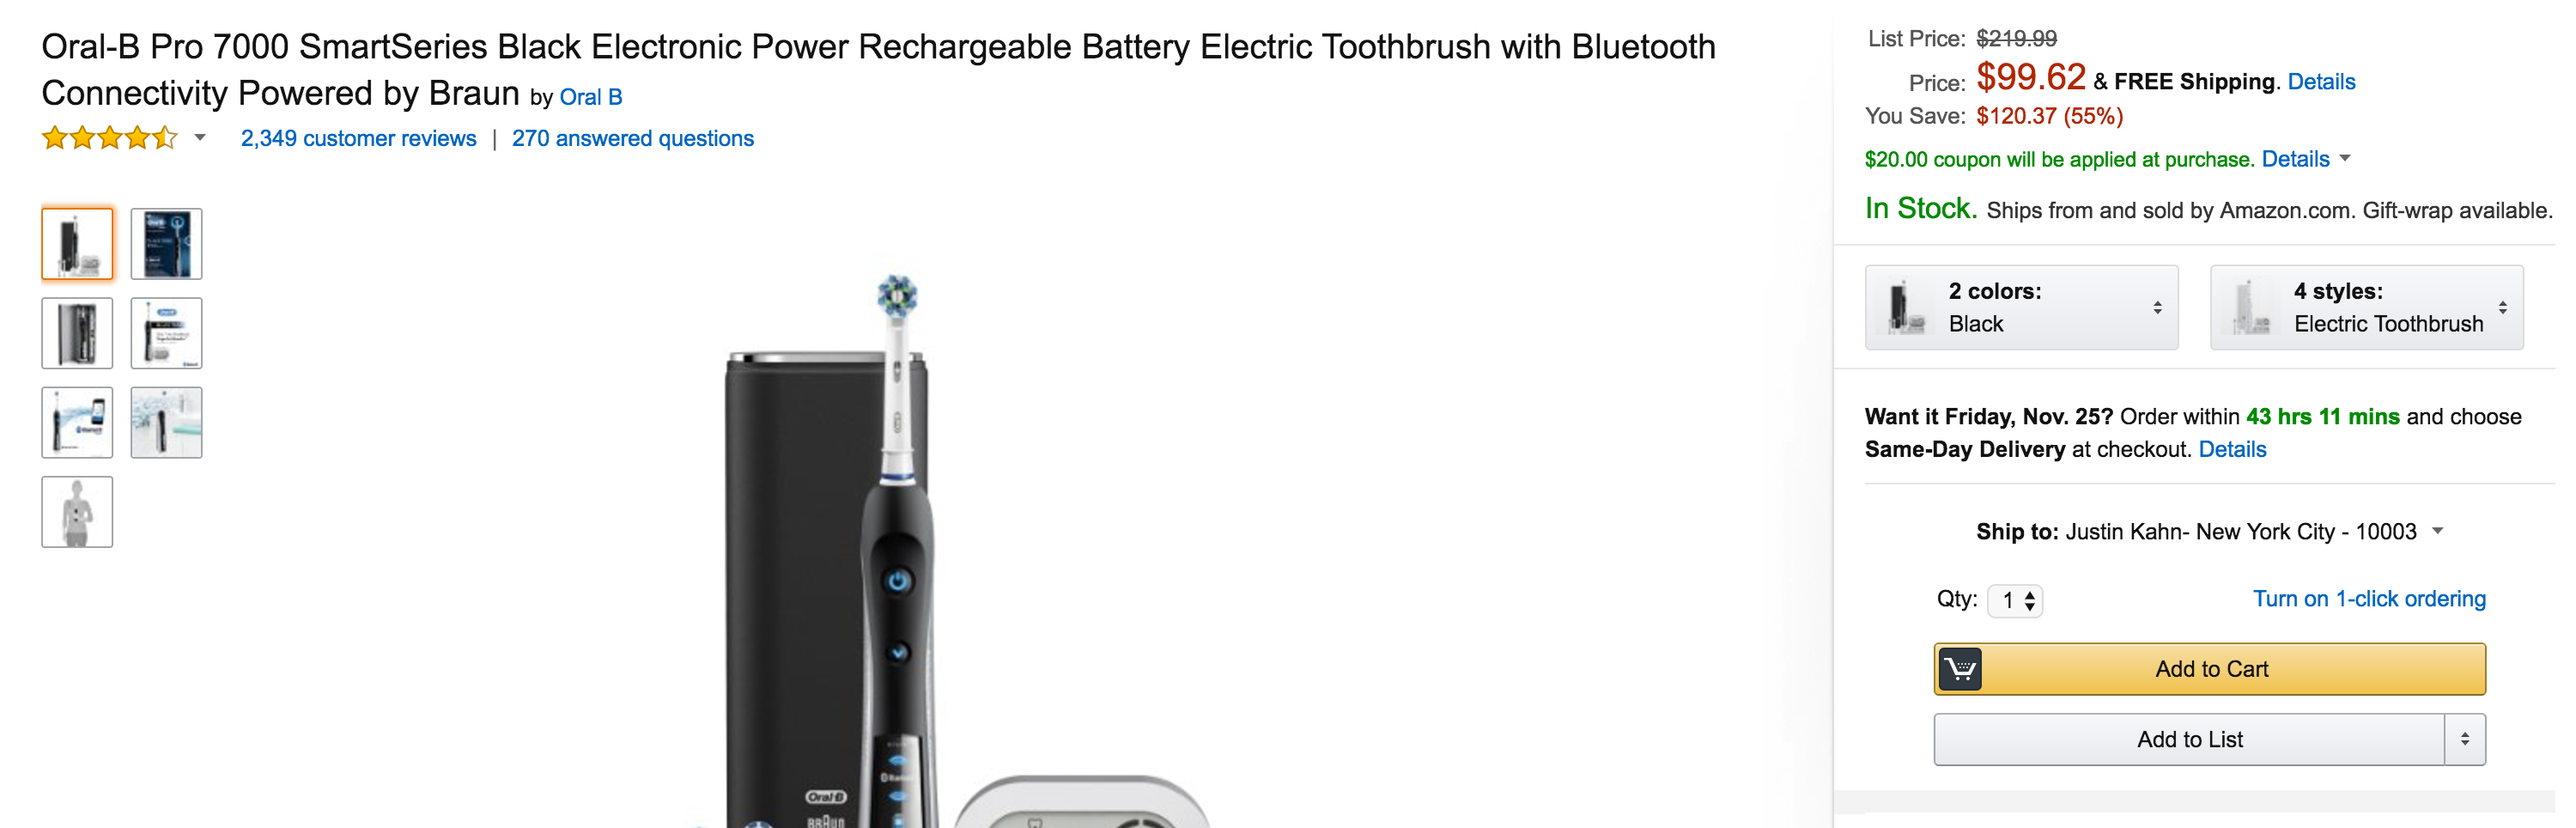 oral-b-black-7000-smartseries-electric-rechargeable-toothbrush-2